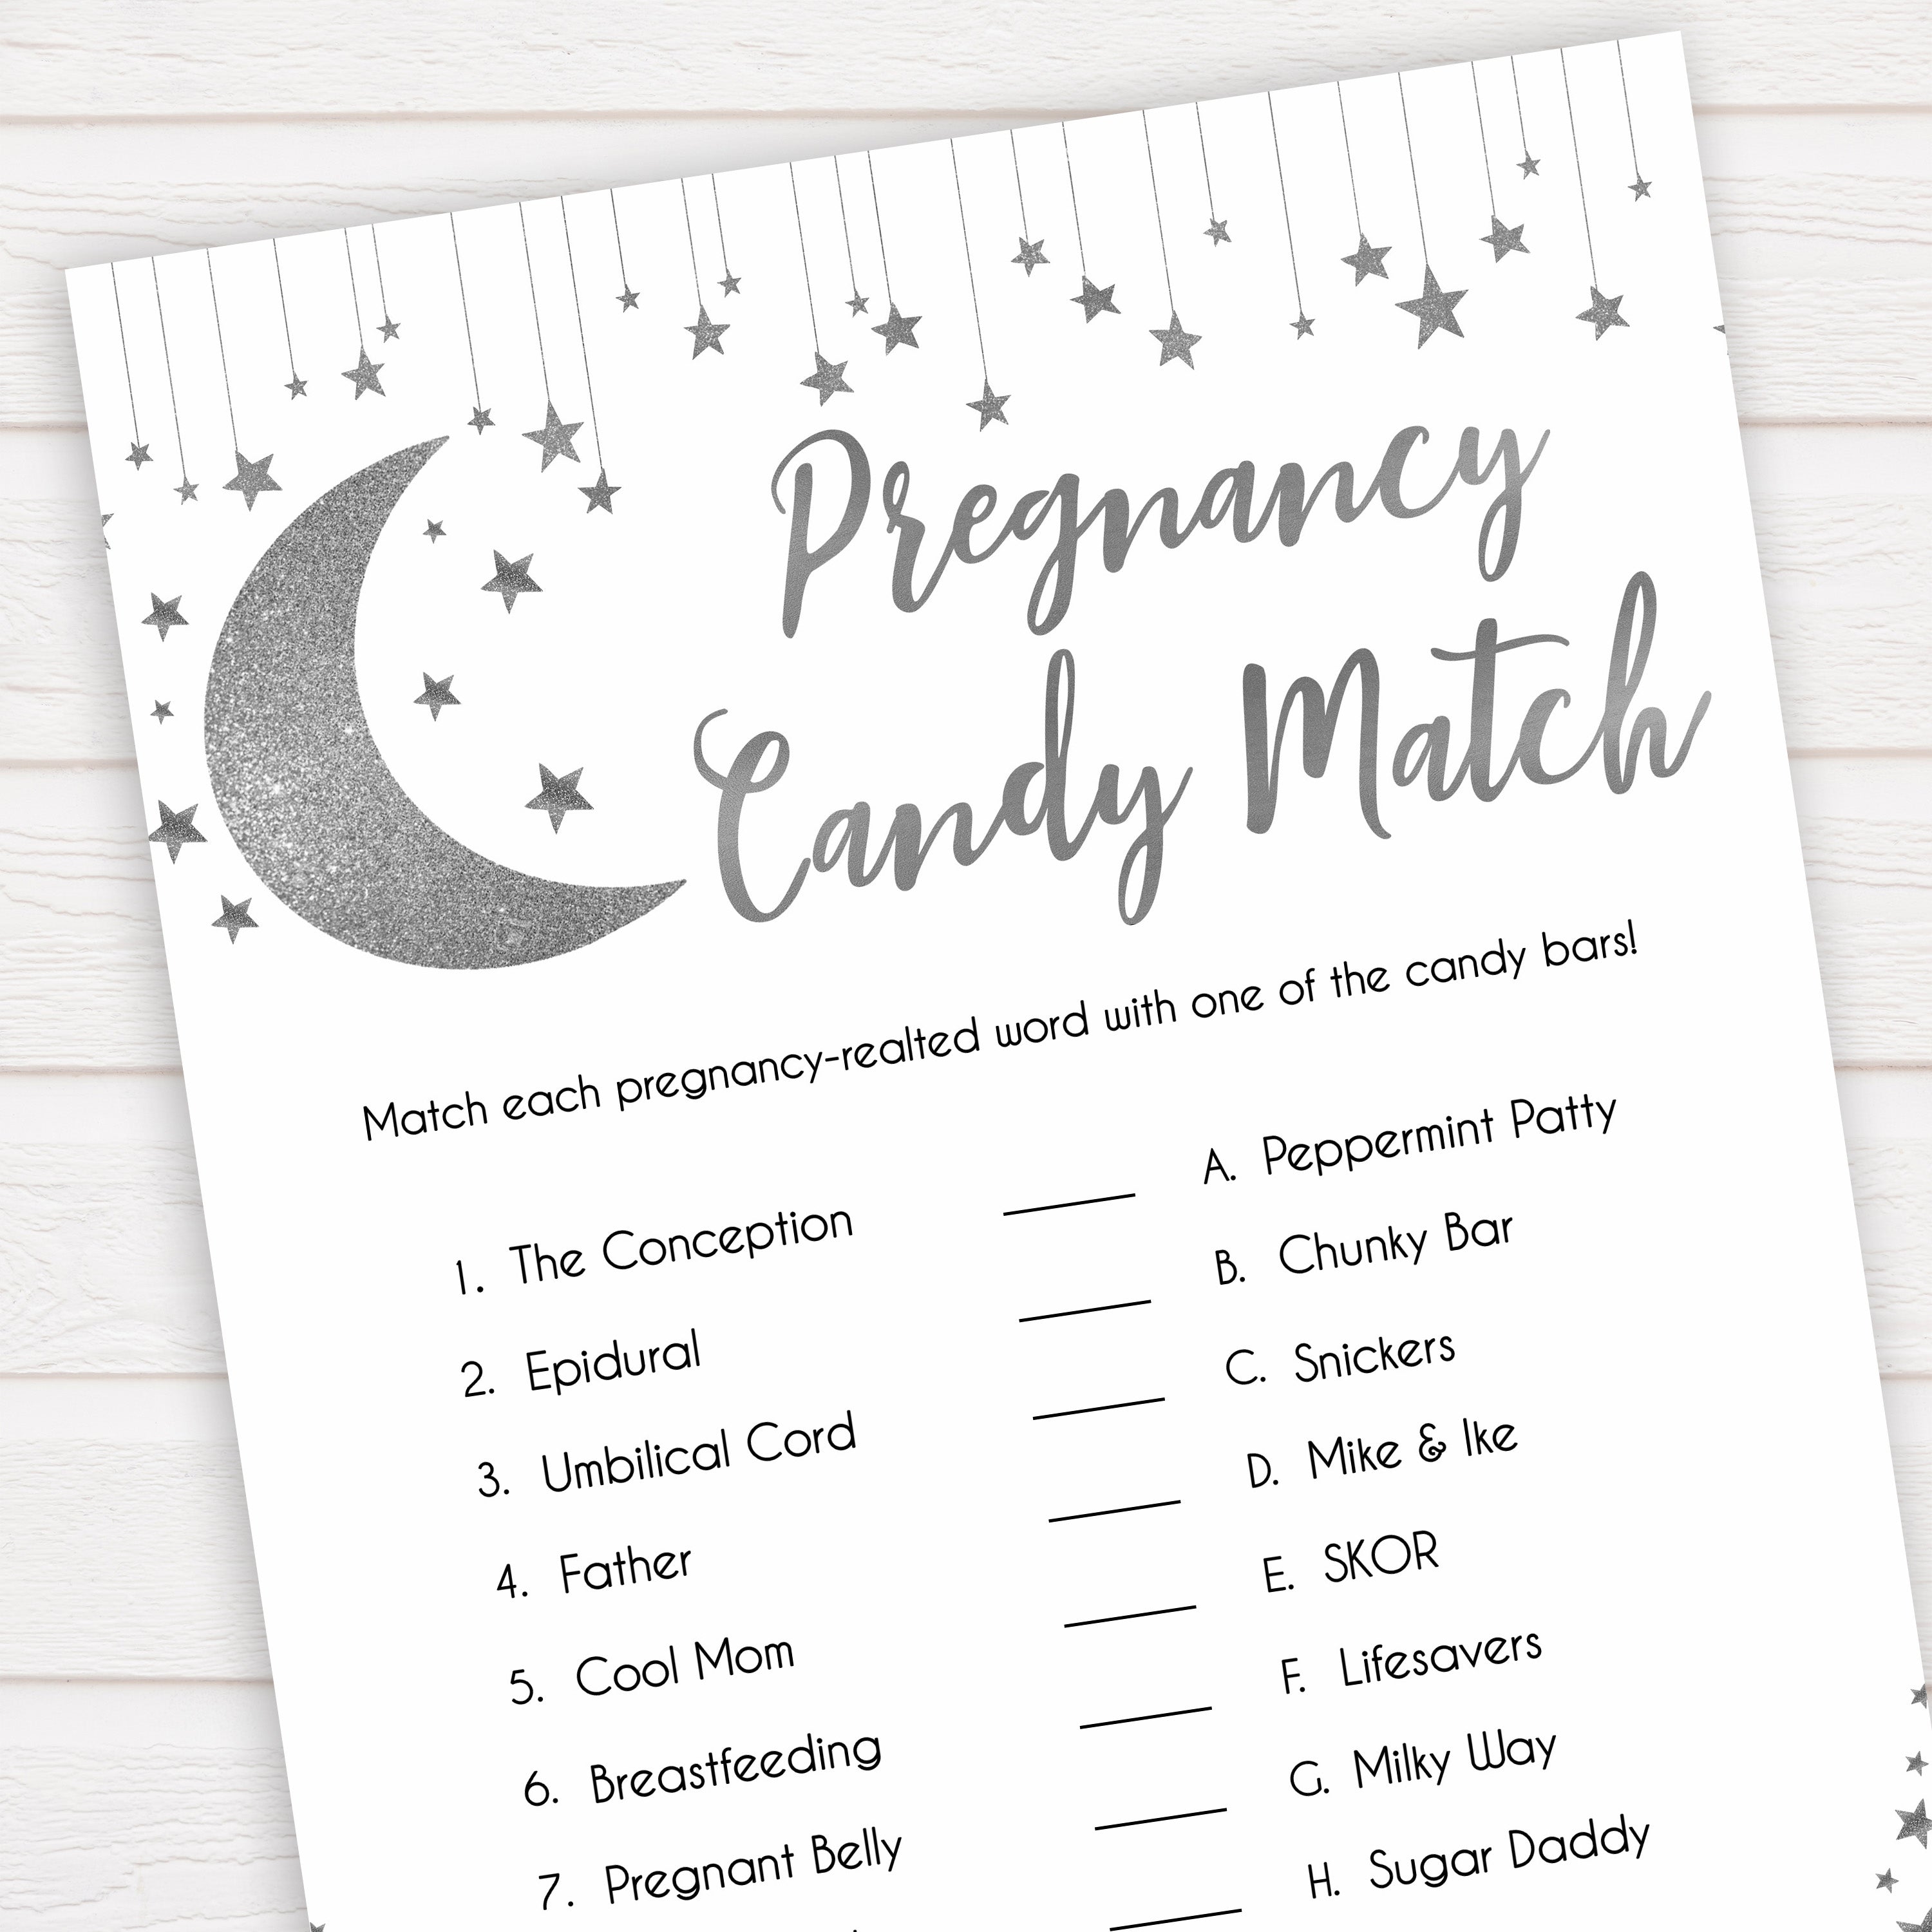 Silver little star, candy match baby games, baby shower games, printable baby games, fun baby games, twinkle little star games, baby games, fun baby shower ideas, baby shower ideas